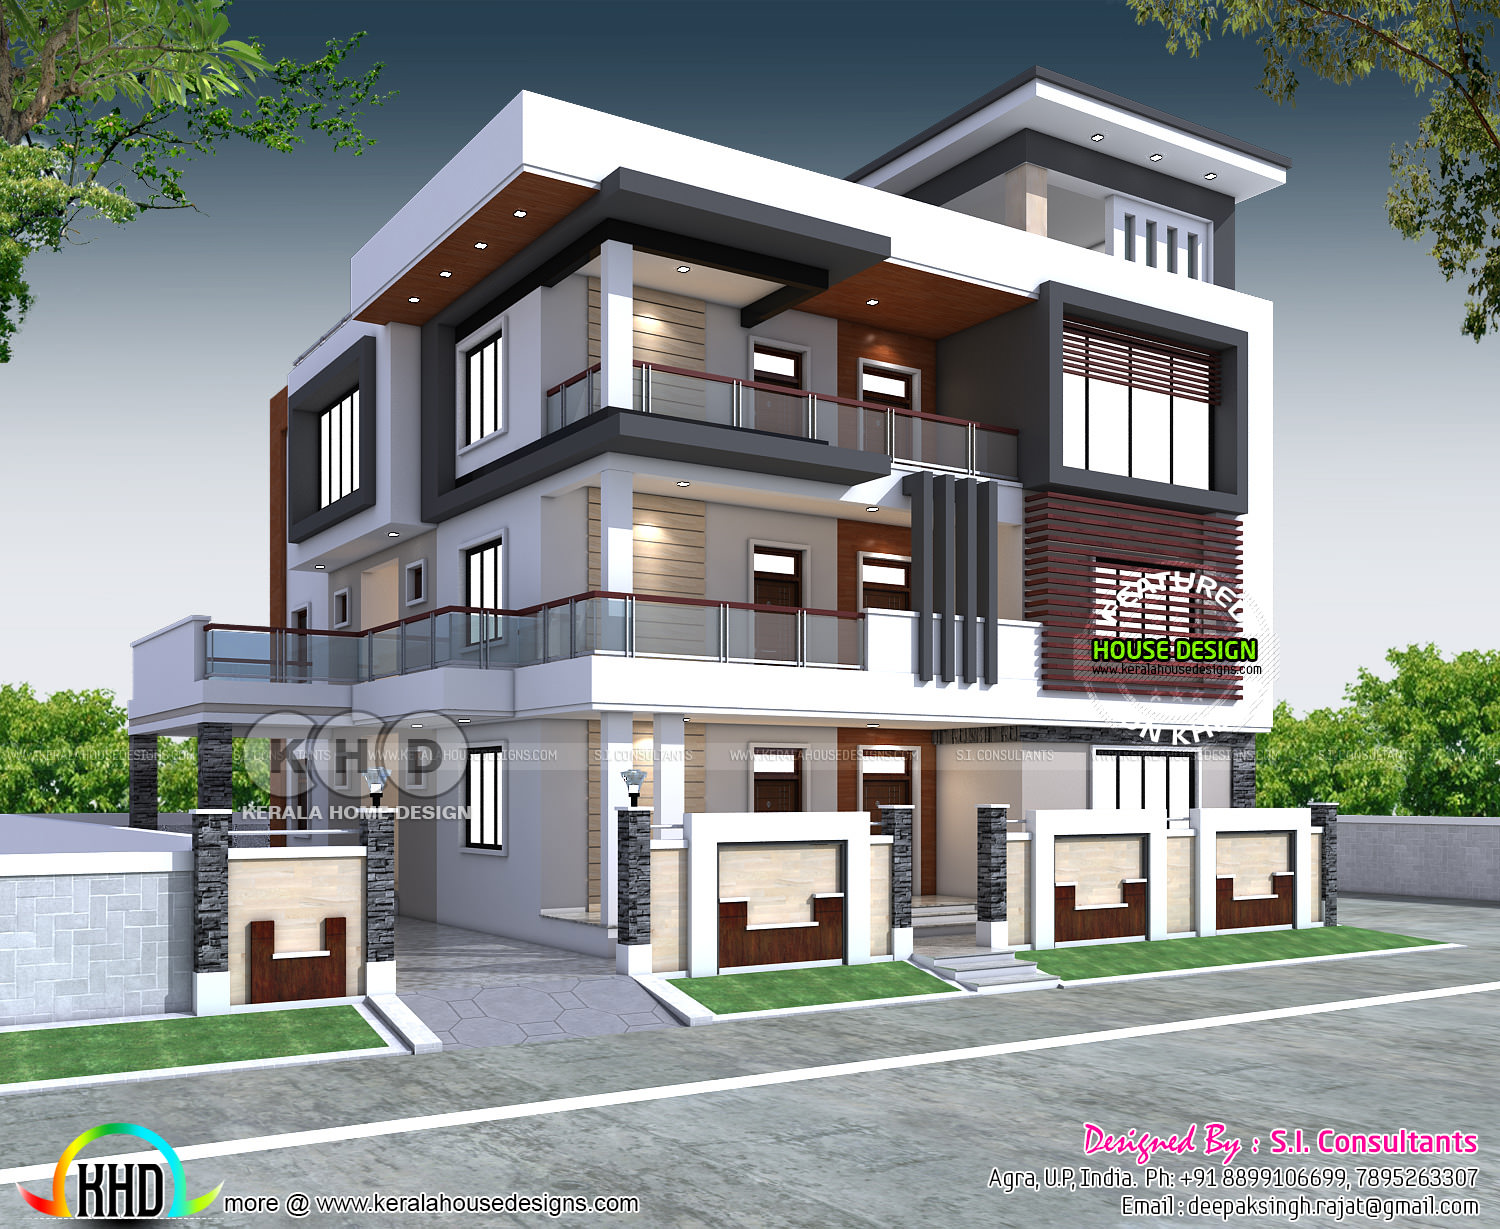 8 bedroom house plans indian style